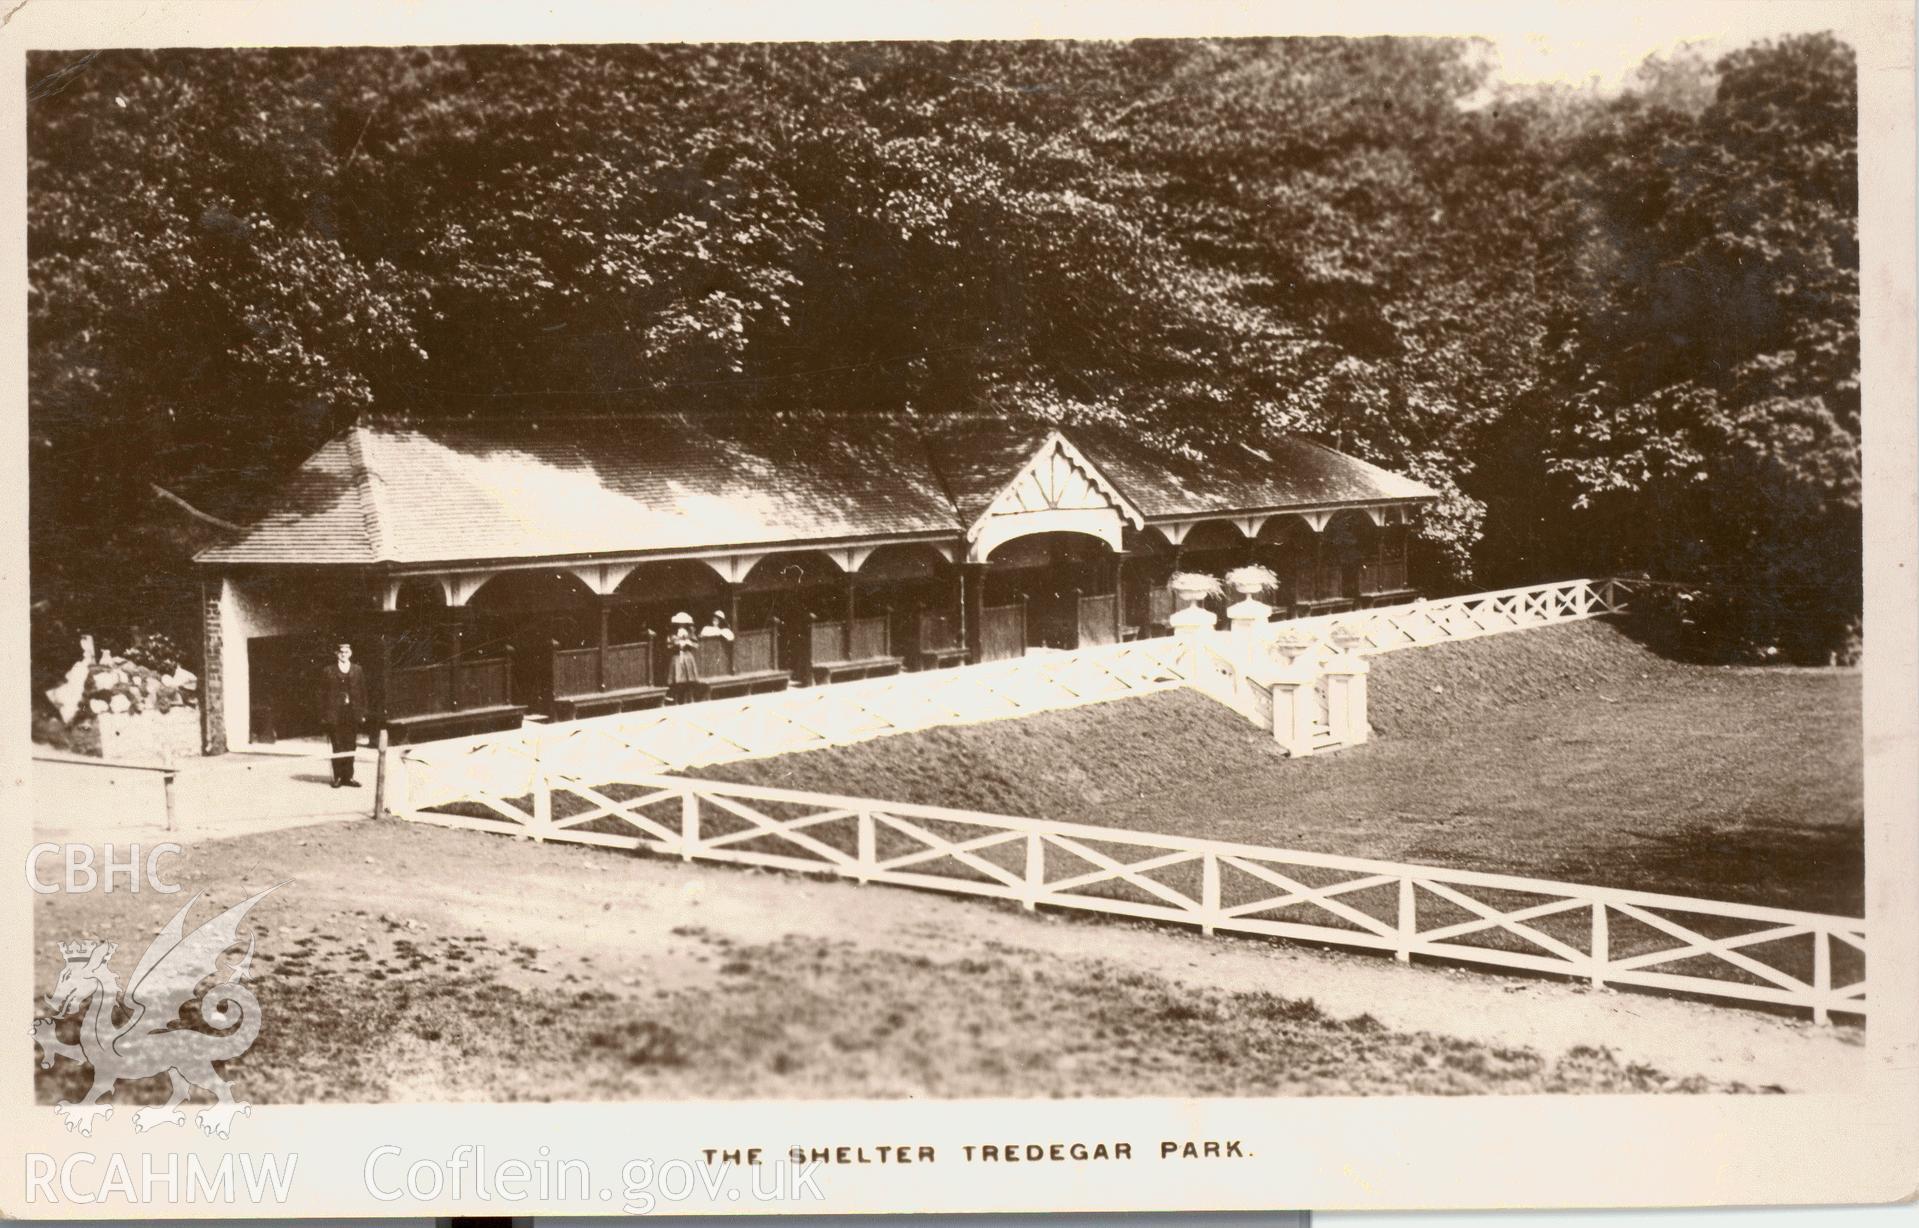 Digitised postcard image of the Shelter, Bedwellty Park, Tredegar, E.G. Bowen, 22 Commercial St, Tredegar. Produced by Parks and Gardens Data Services, from an original item in the Peter Davis Collection at Parks and Gardens UK. We hold only web-resolution images of this collection, suitable for viewing on screen and for research purposes only. We do not hold the original images, or publication quality scans.